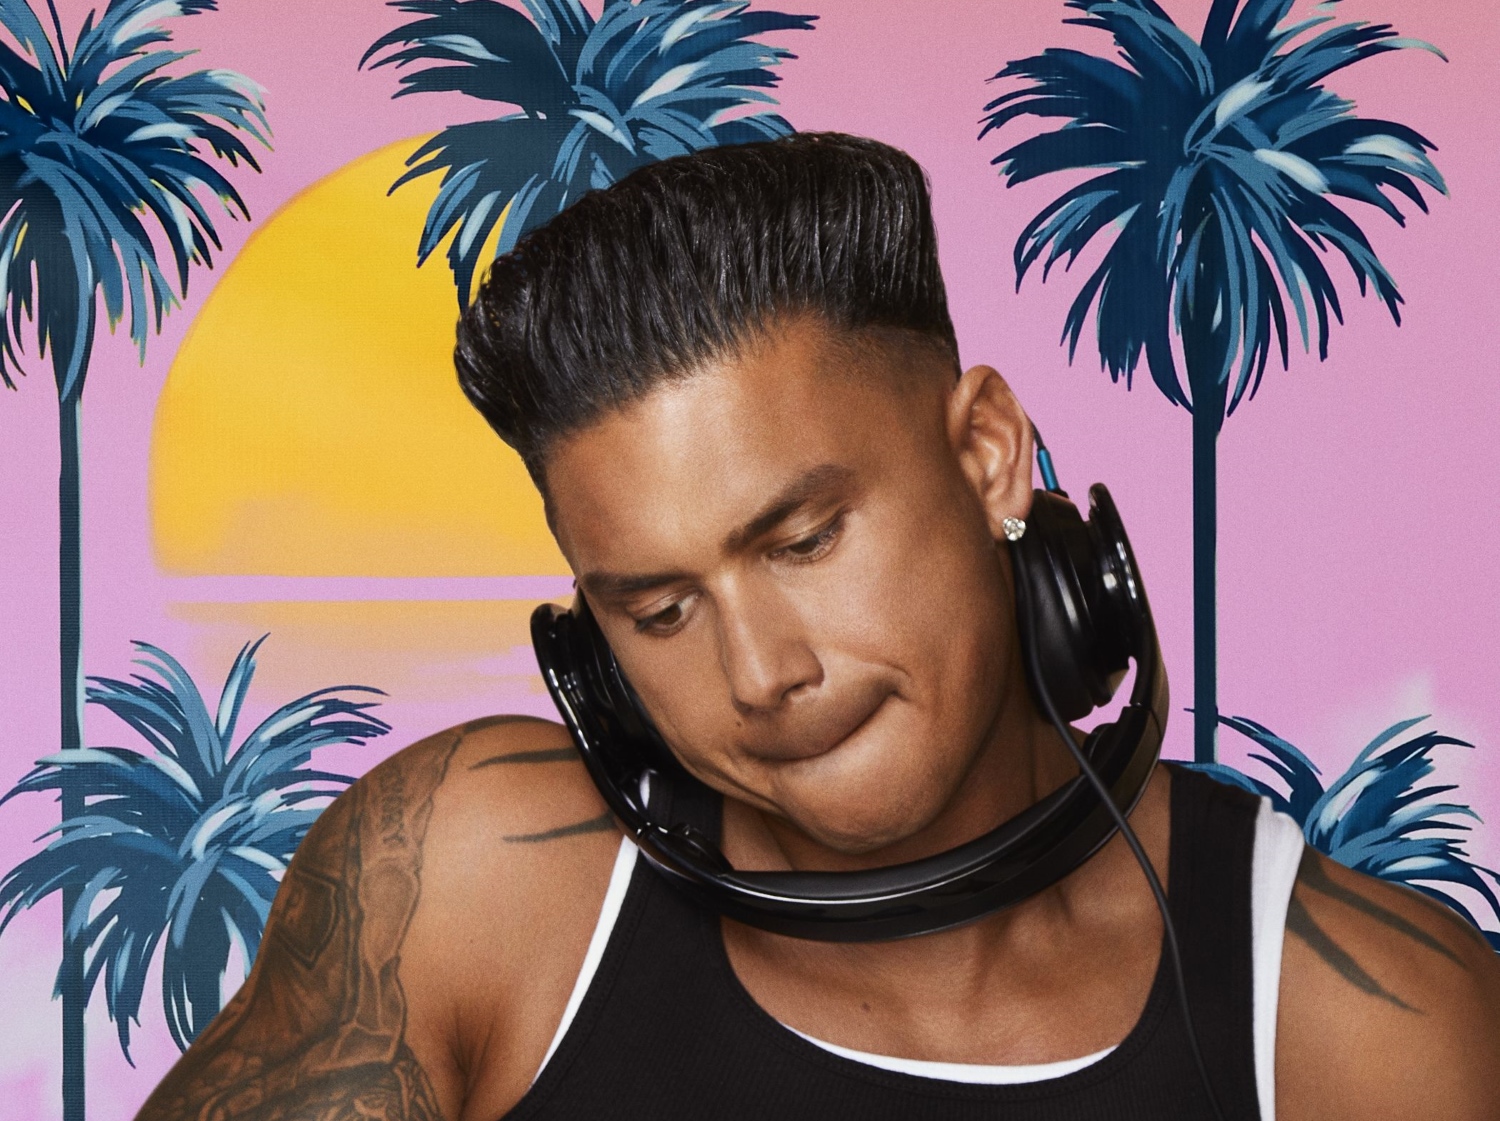 Pauly D Confirmed For 